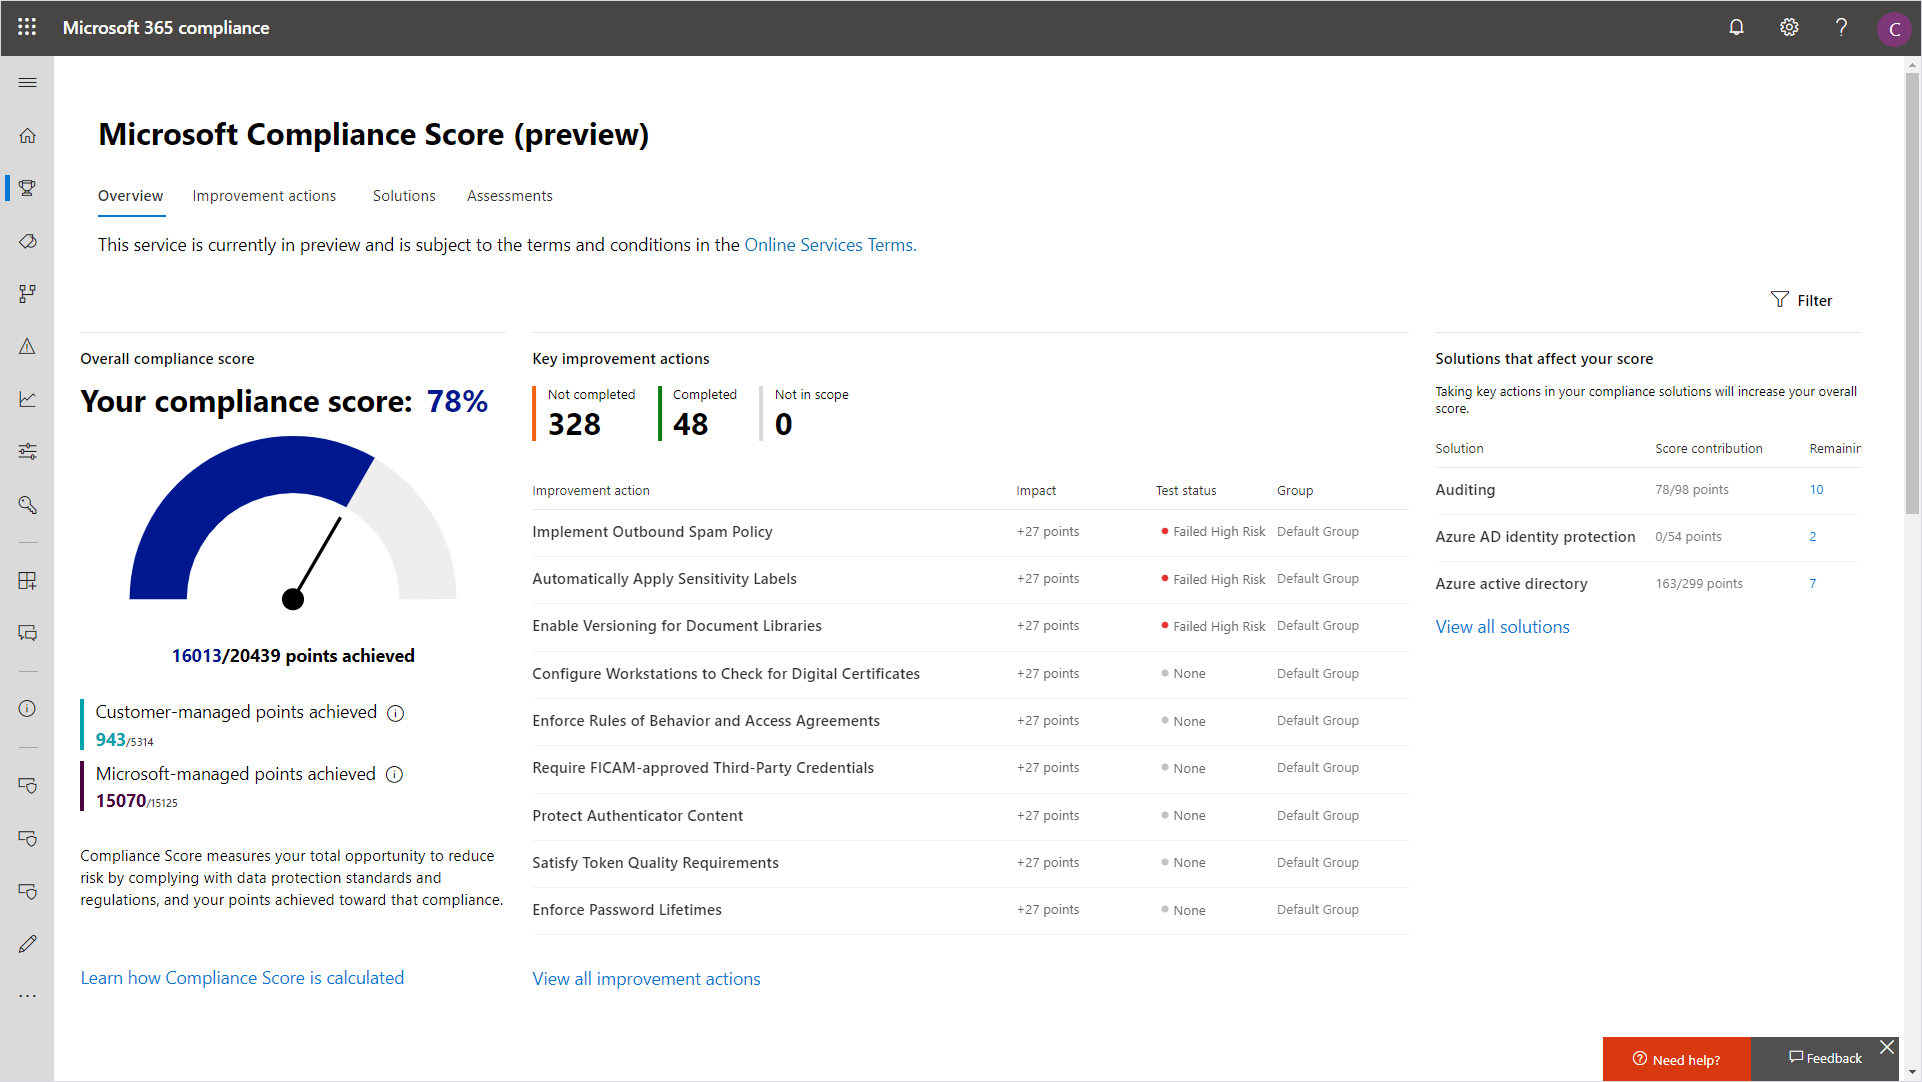 Image showing a Microsoft Compliance Score dasy, now in preview.